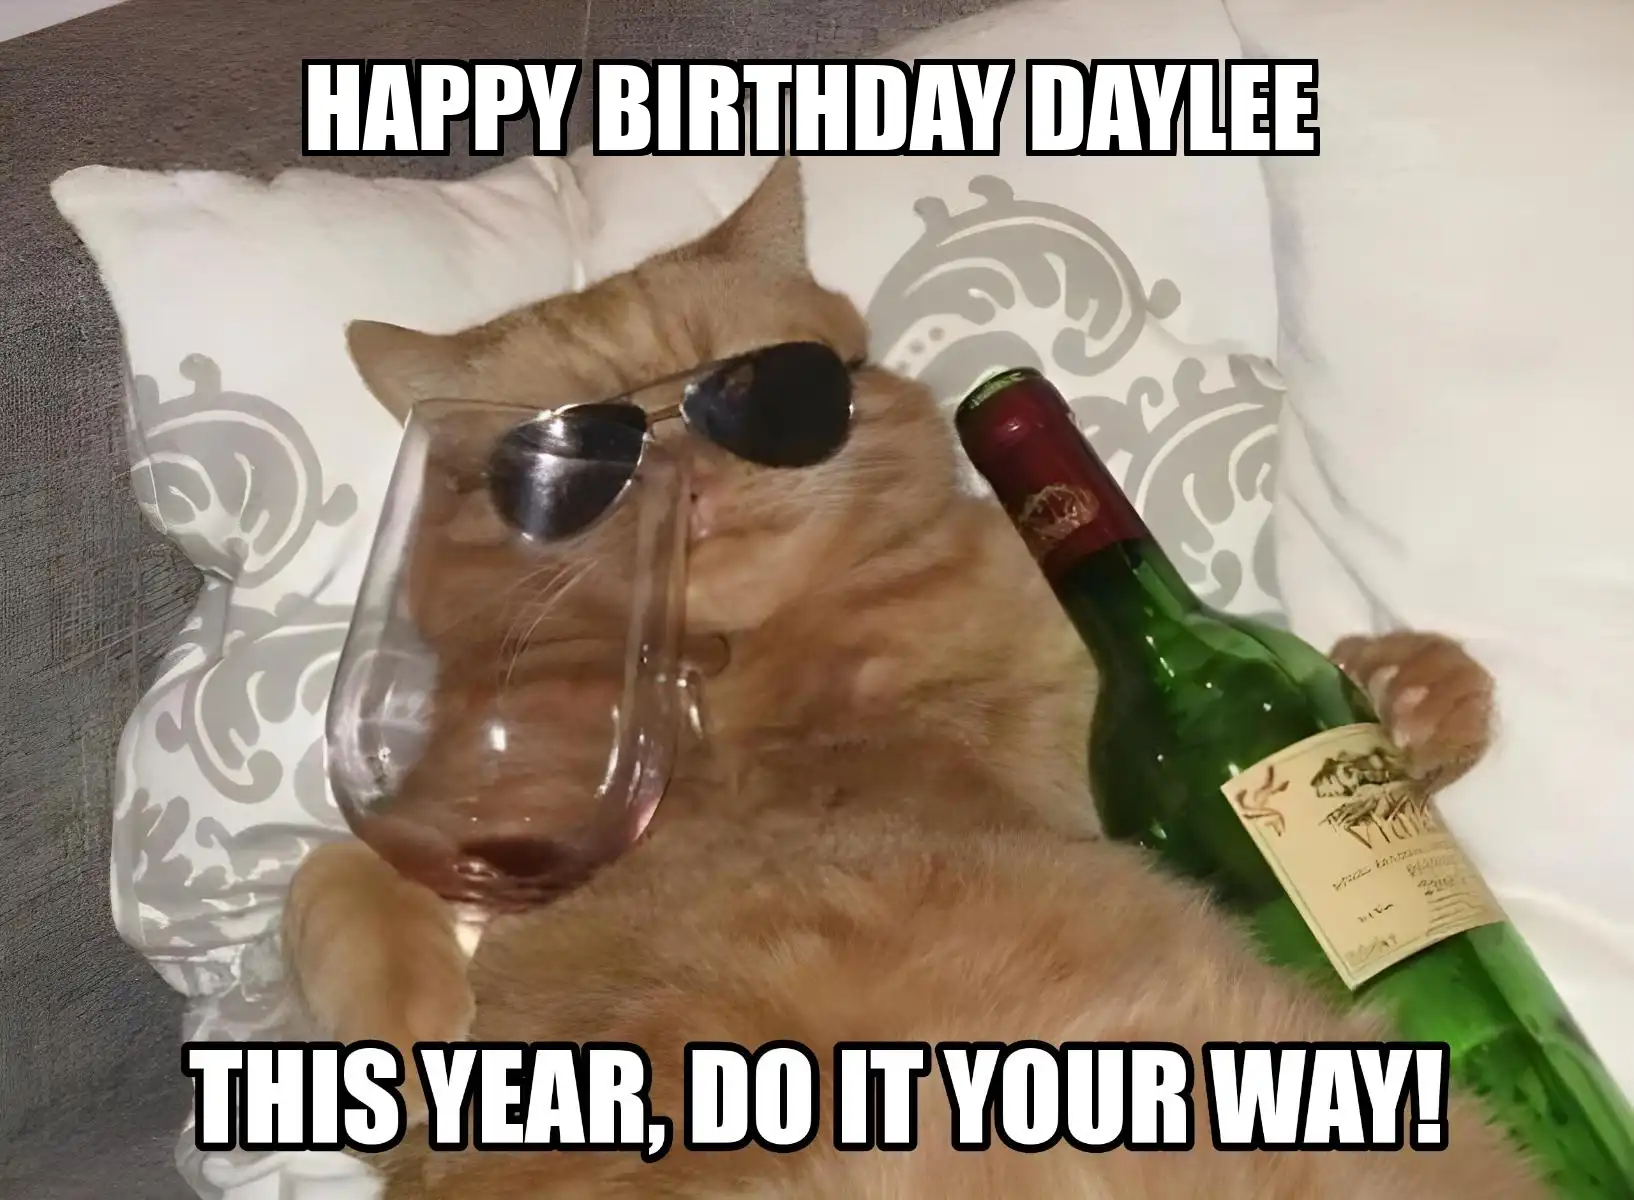 Happy Birthday Daylee This Year Do It Your Way Meme